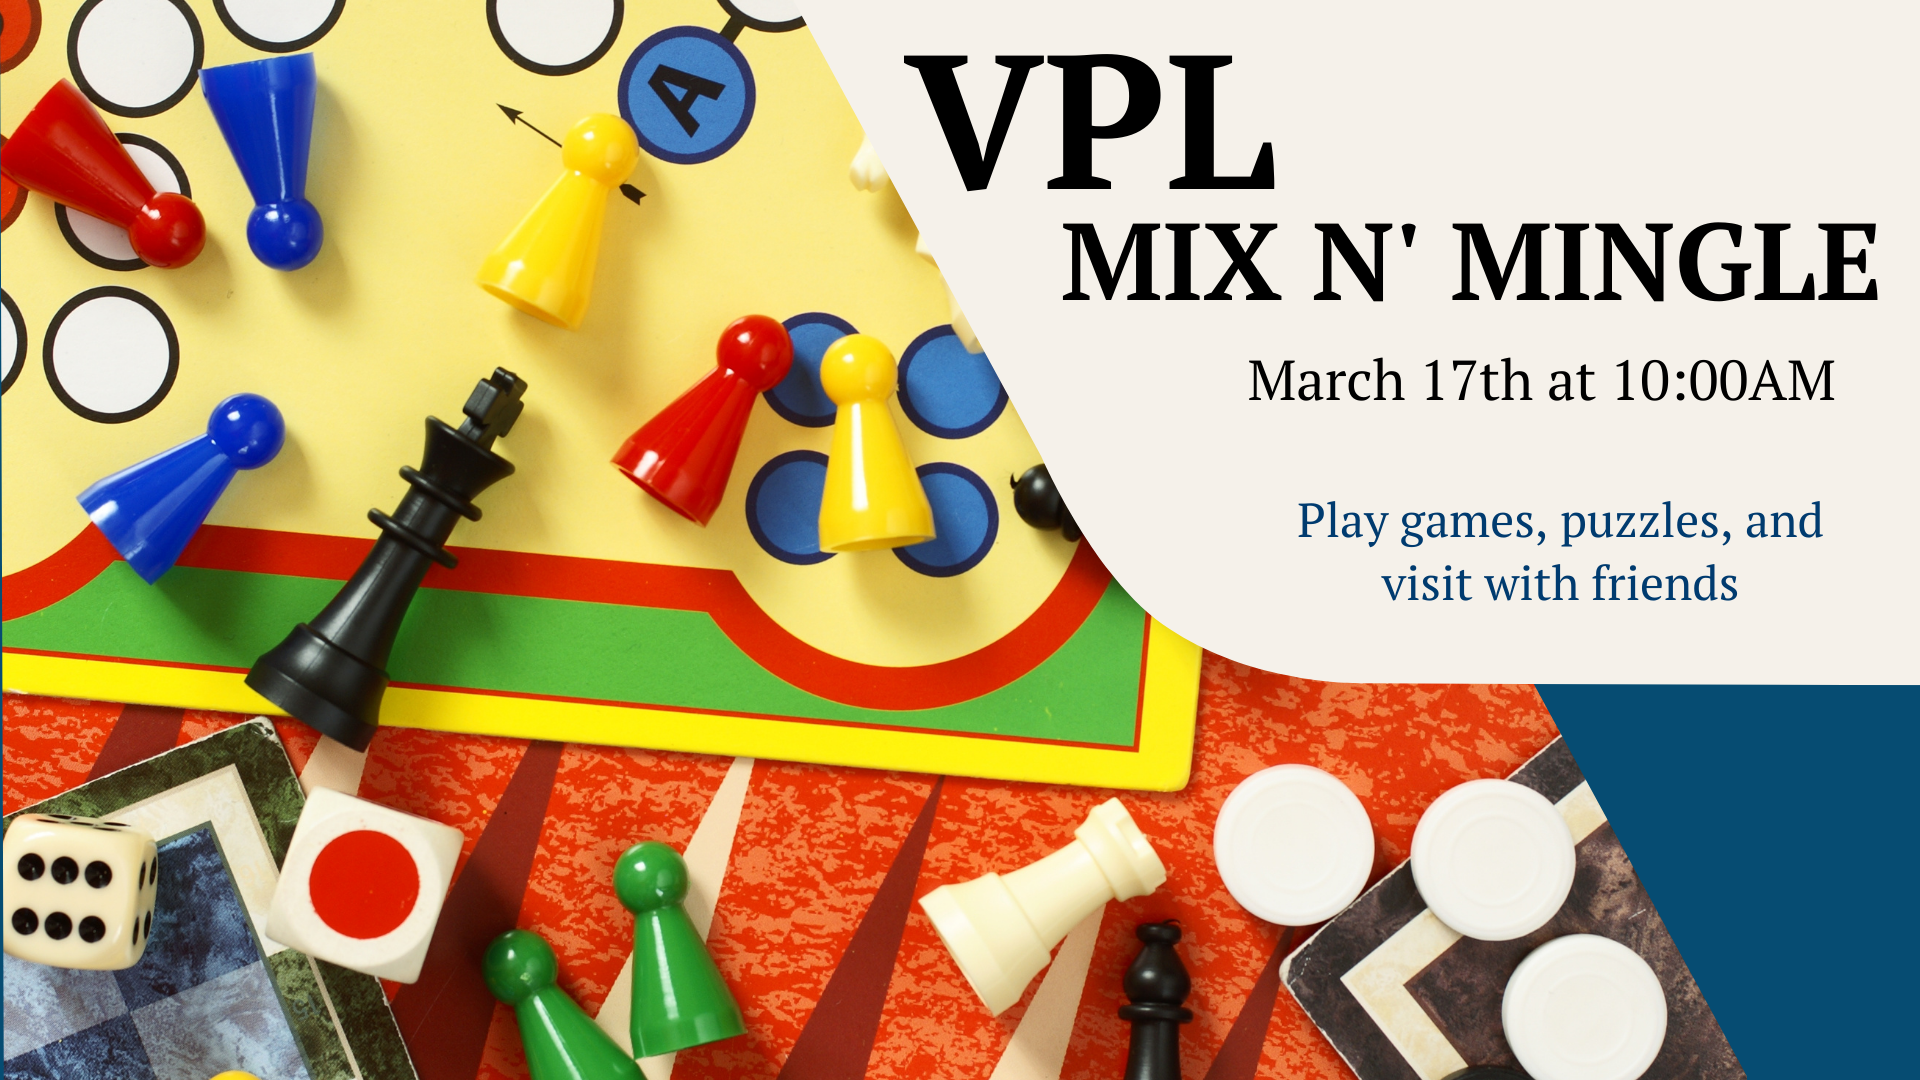 VPL Morning Mix n mingle, March 17th at 10am